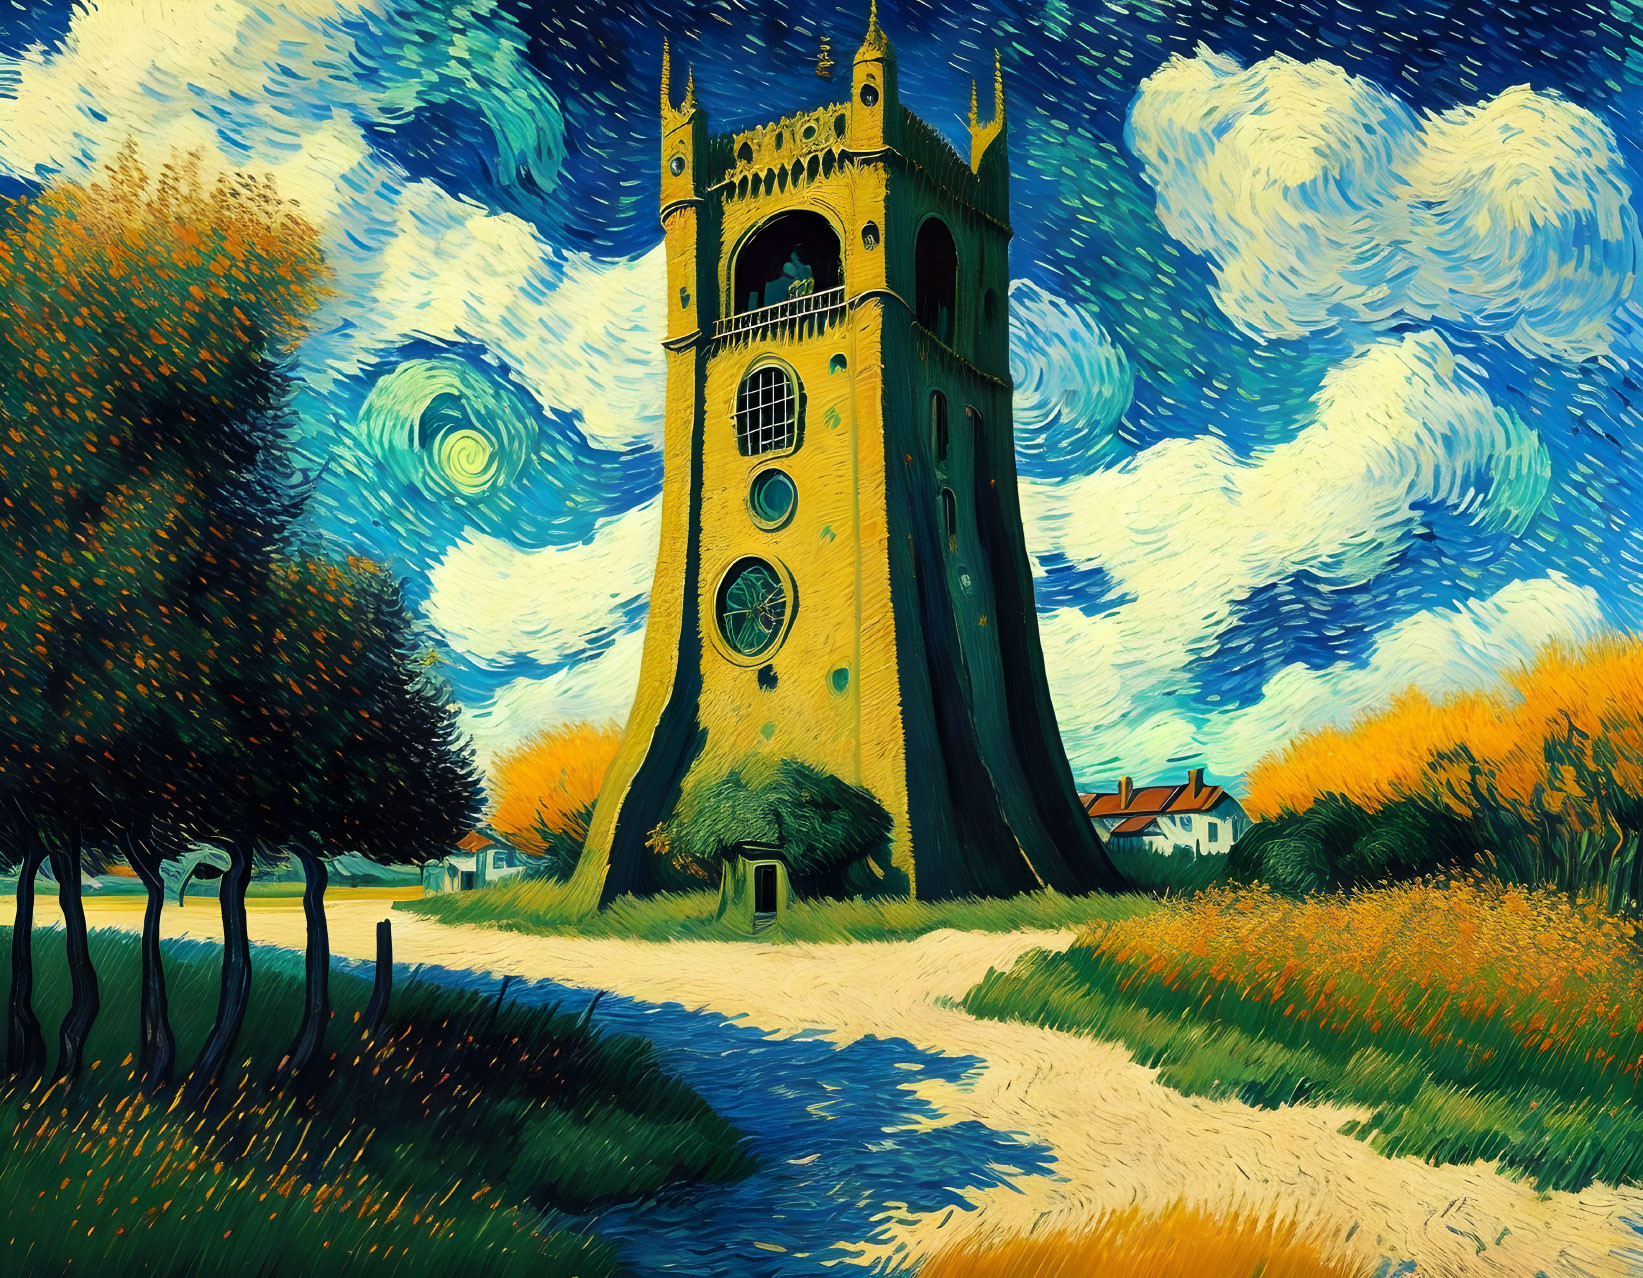 Tall Tower Artwork with Swirling Sky and Autumn Trees